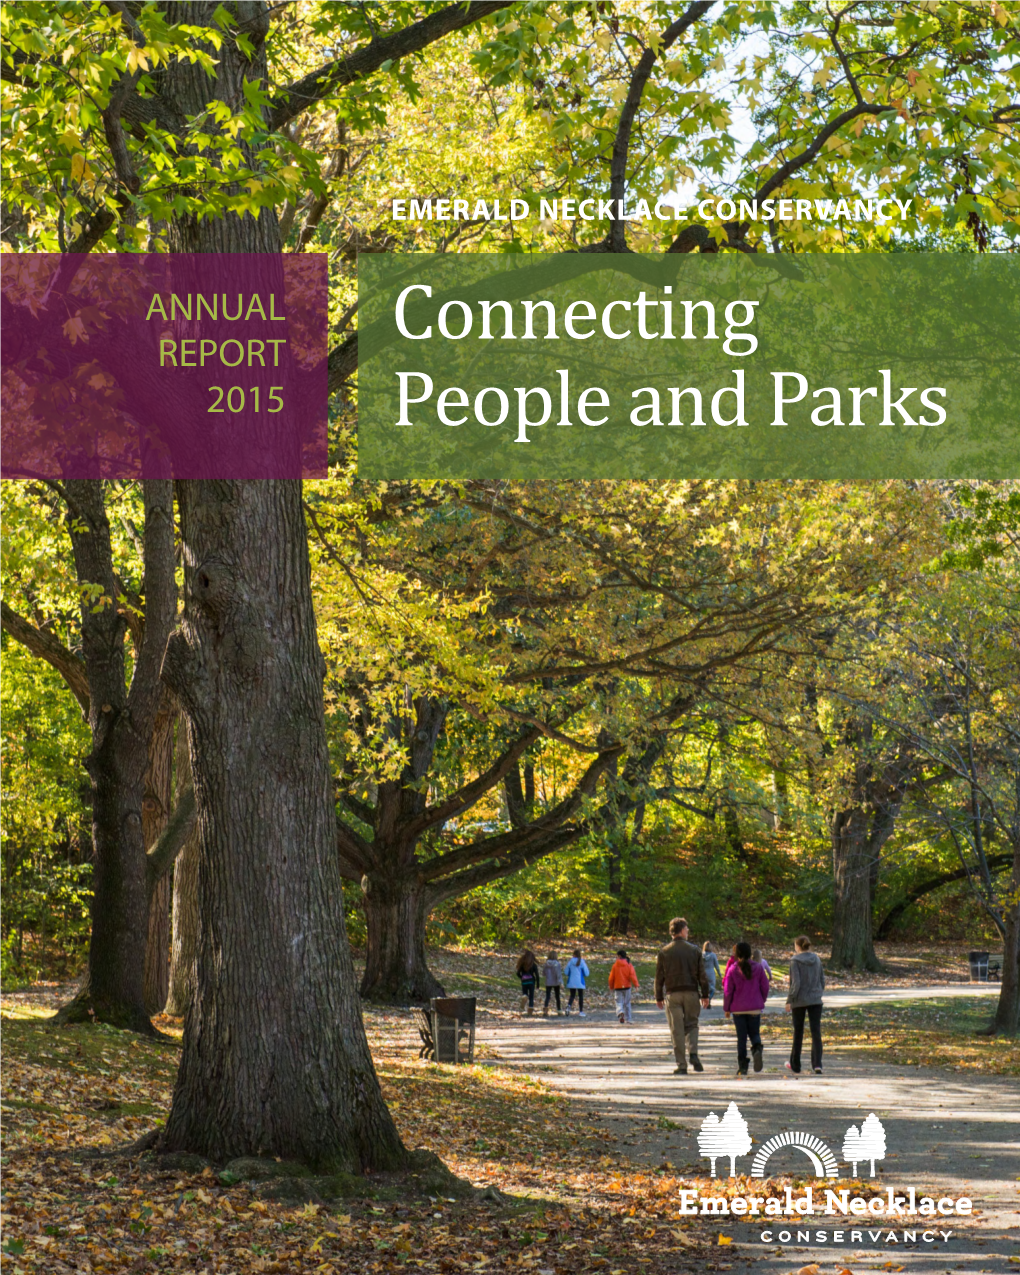 Connecting People and Parks Through Preservation